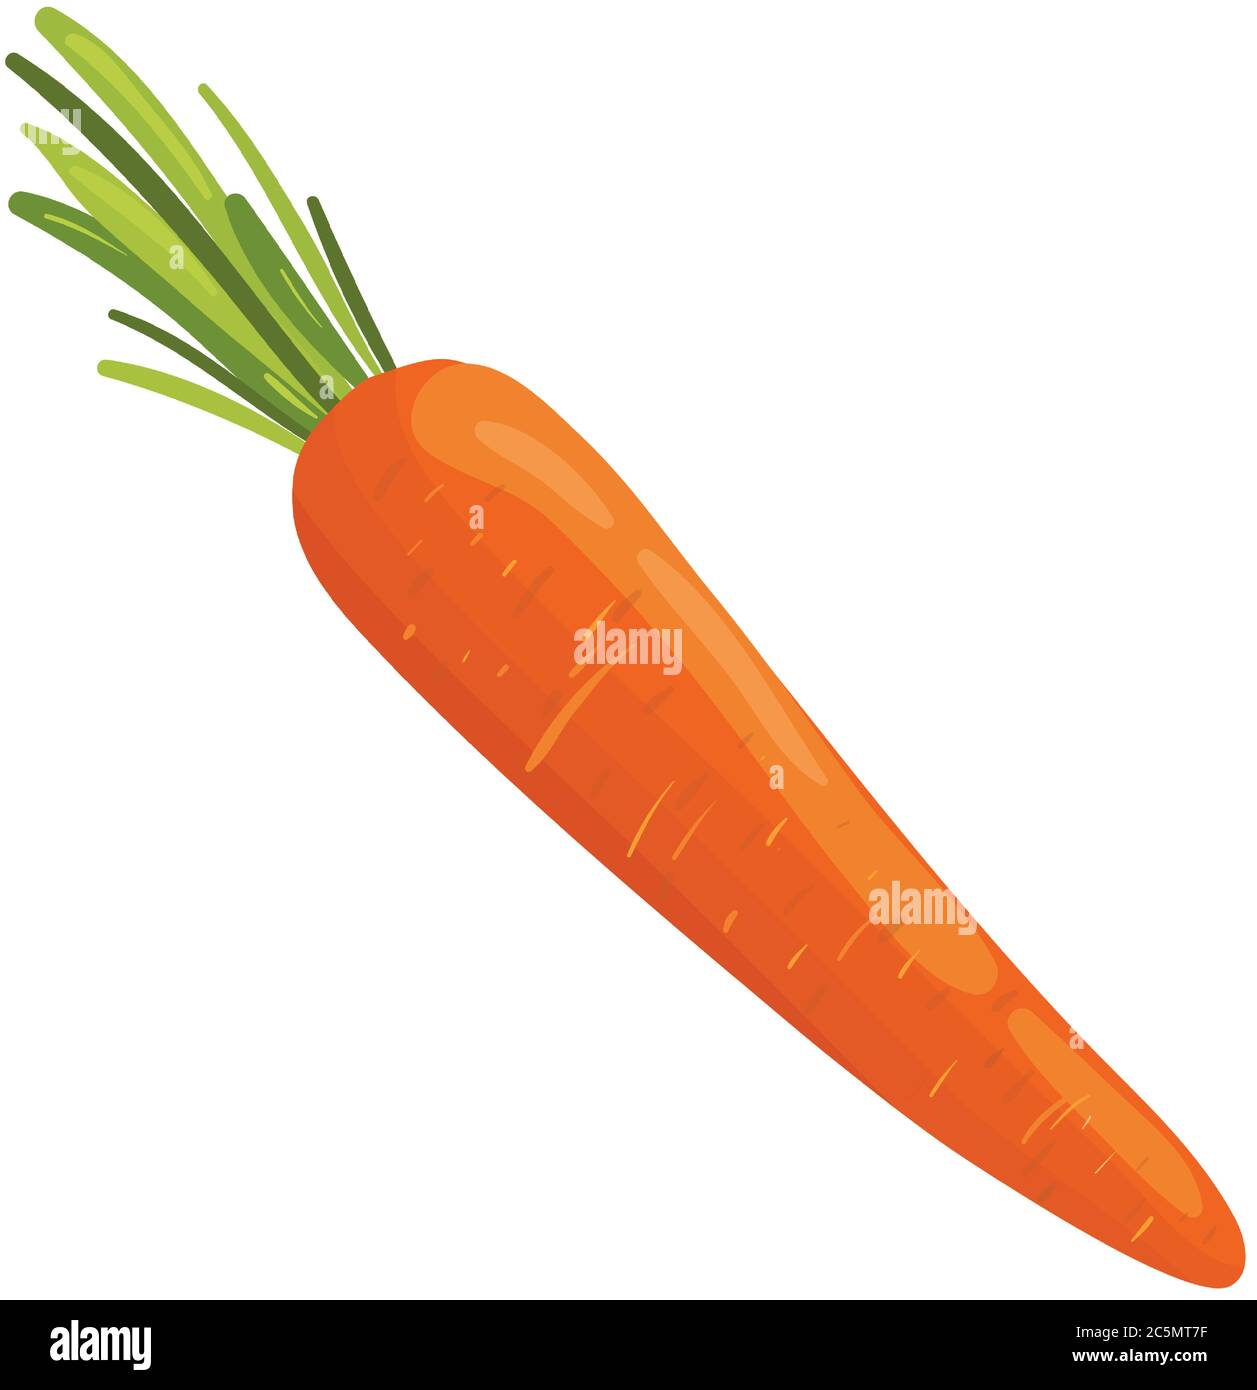 Bright vector carrot. Fresh cartoon vegetable isolated on white background. Illustration used for magazine, book, poster, card, menu cover, web pages. Stock Vector